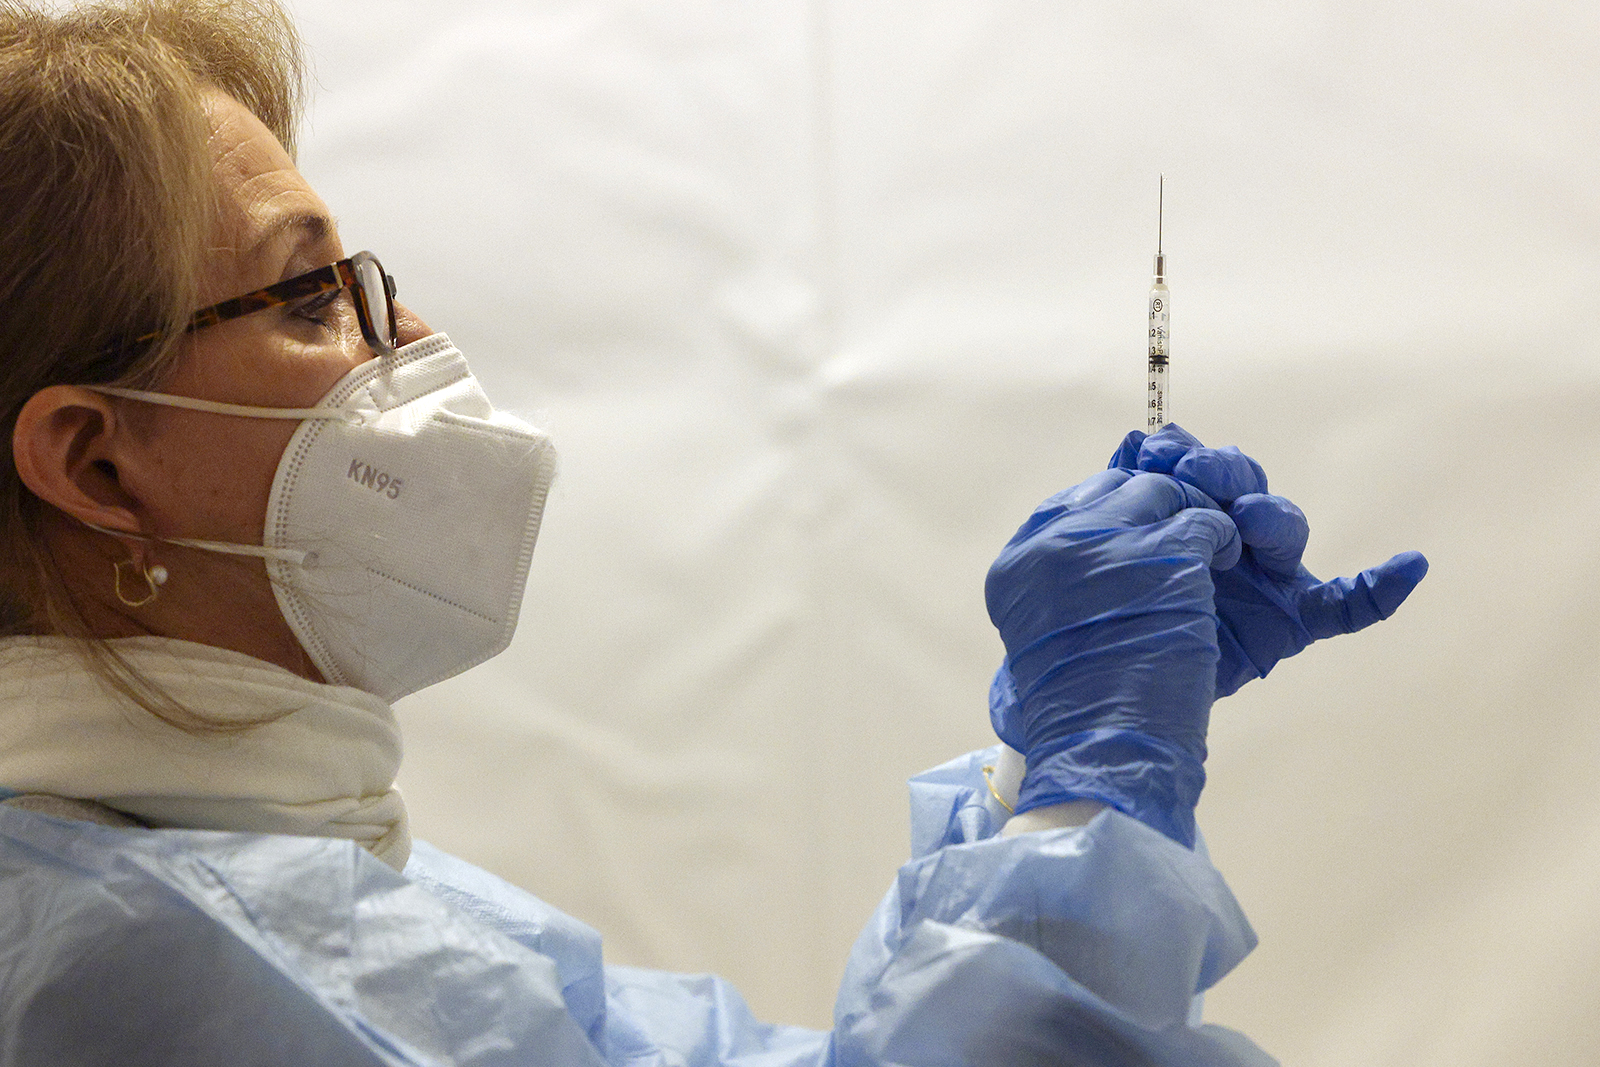 A healthcare worker prepares a dose of the Pfizer BioNTech Covid-19 vaccine at a vaccination site in the Bronx borough of New York, on February 5.